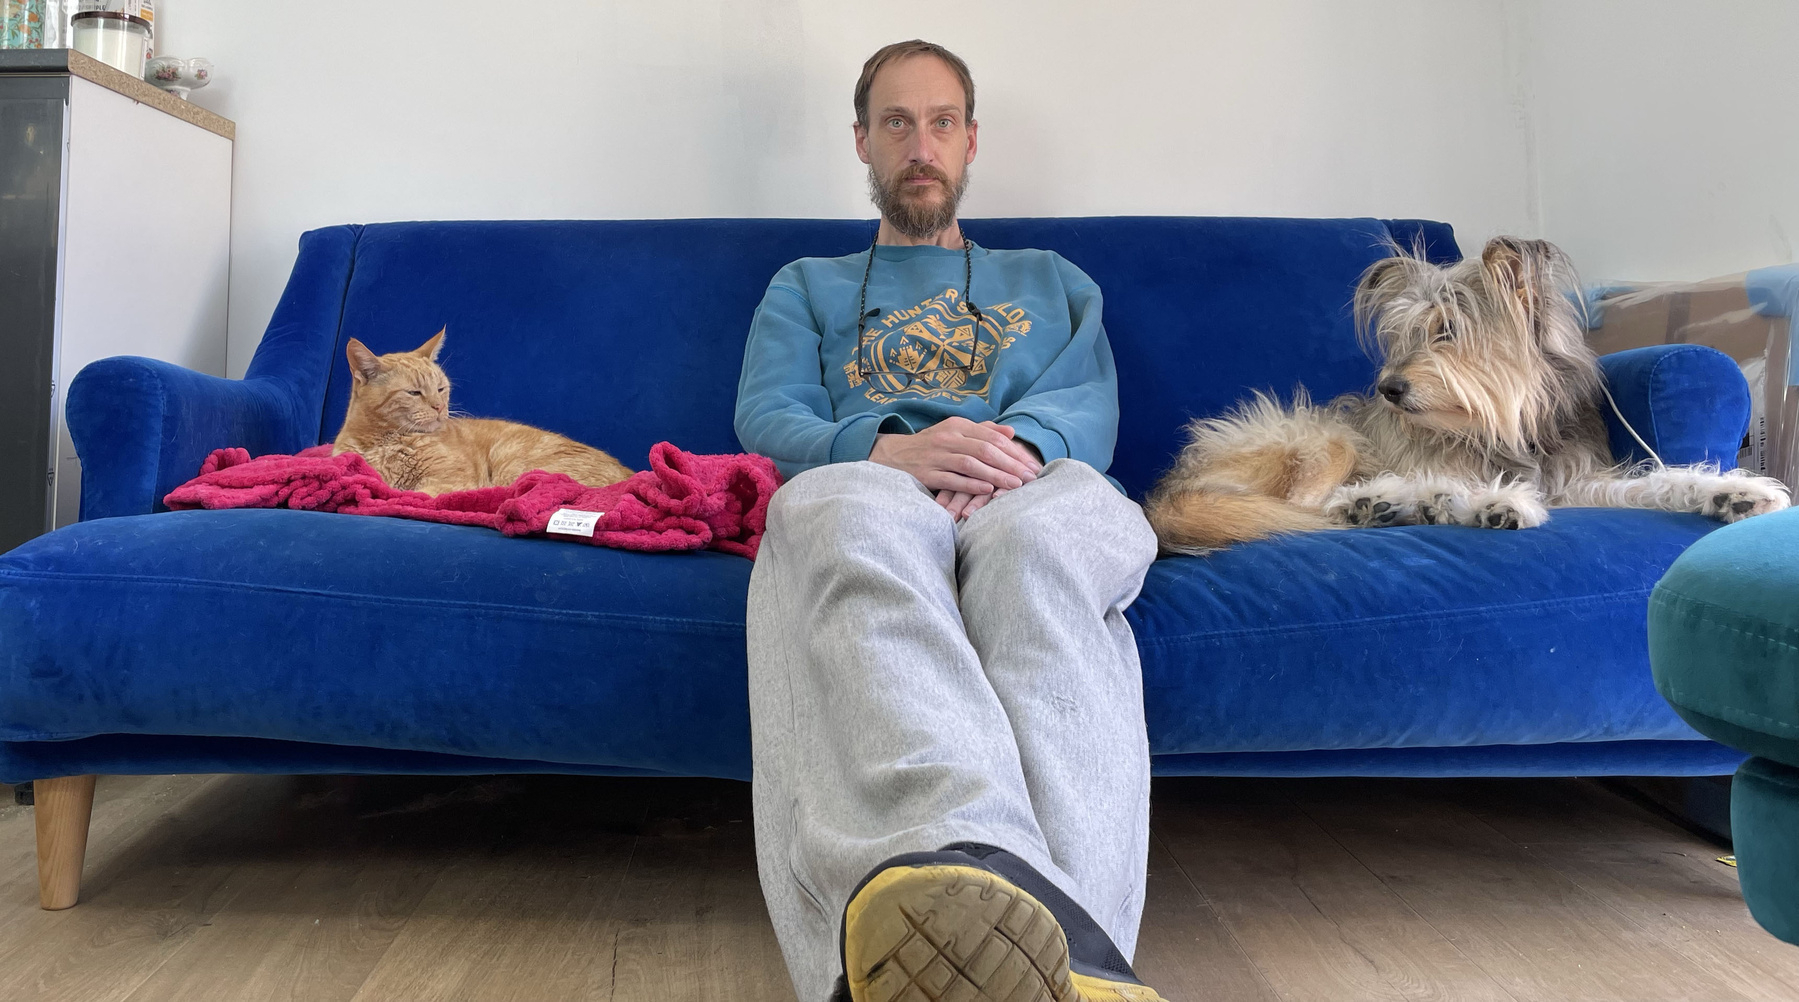 Dr. Adam Procter sits on his couch with his dog, Monty to his left and his cat Marmalade to his right, it resembles a photo for a nerd interview magazine, this is not a bad thing.